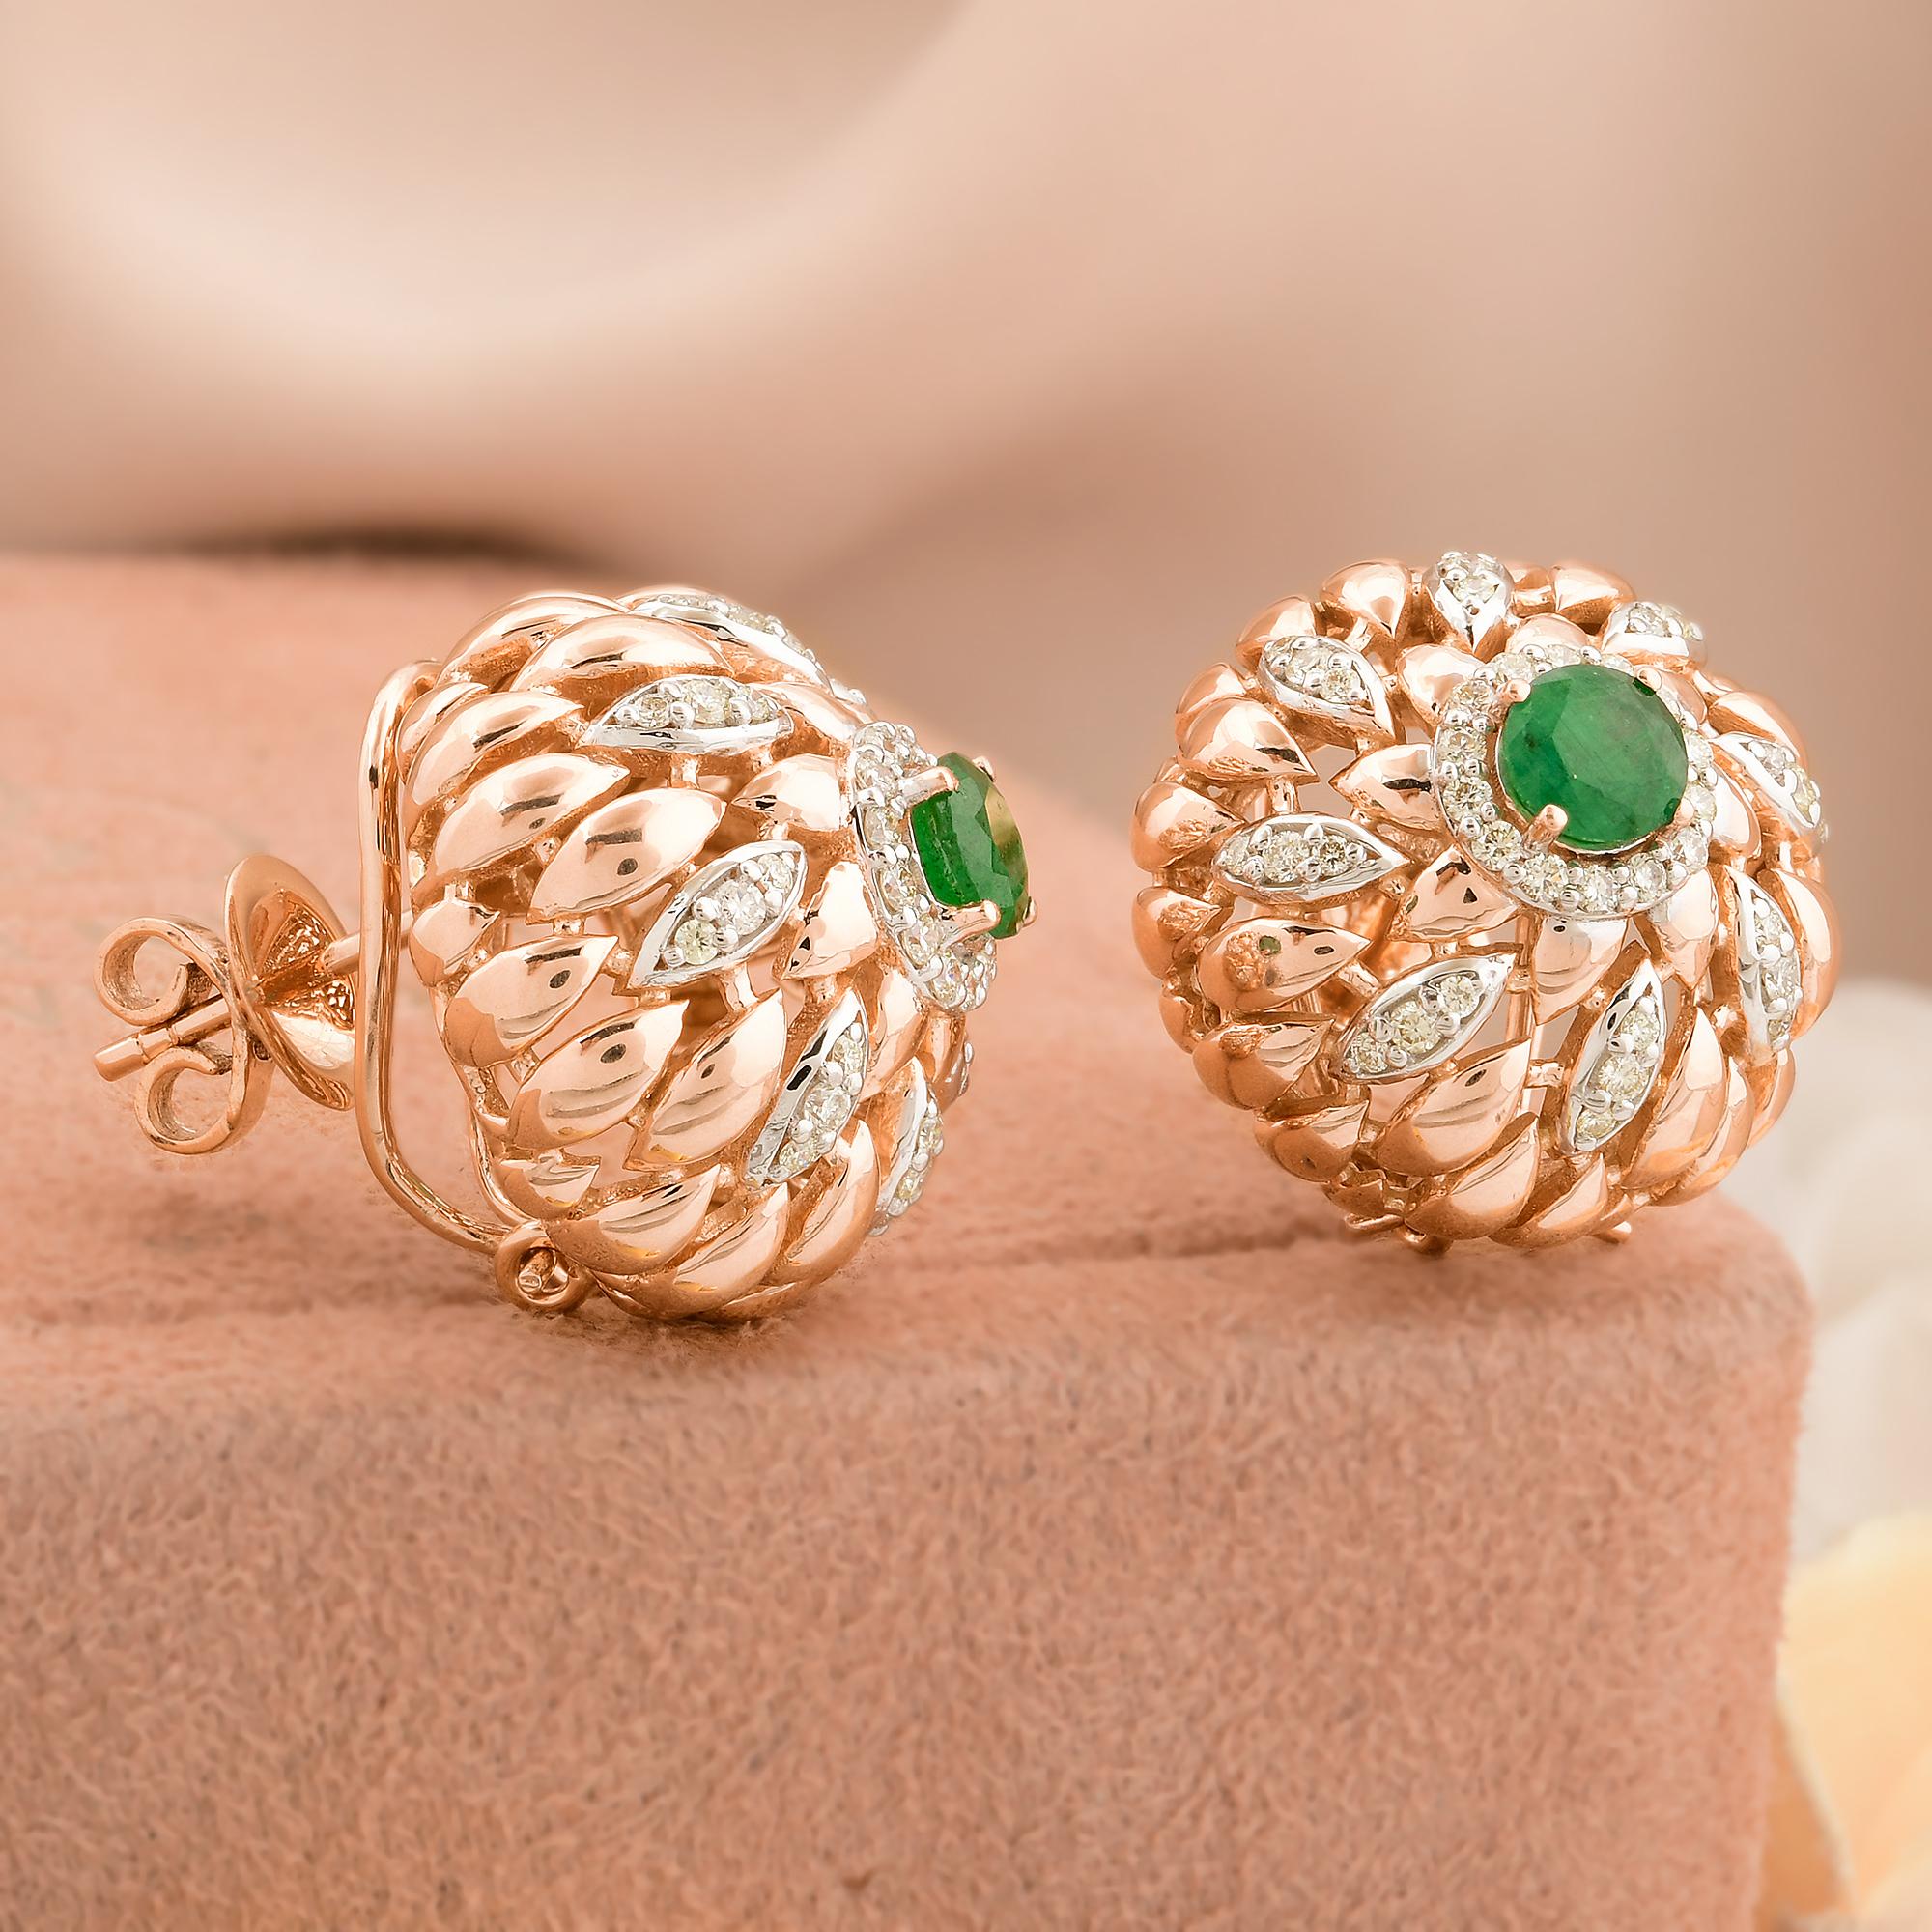 Item Code :- SEE-1577A
Gross Wt. :- 16.06 gm
18k Solid Rose Gold Wt. :- 15.75 gm
Natural Diamond Wt :- 0.64 ct.  ( AVERAGE DIAMOND CLARITY SI1-SI2 & COLOR H-I )
Emerald Wt. :- 0.91 ct.
Earrings Size :- 20x20 mm approx.

✦